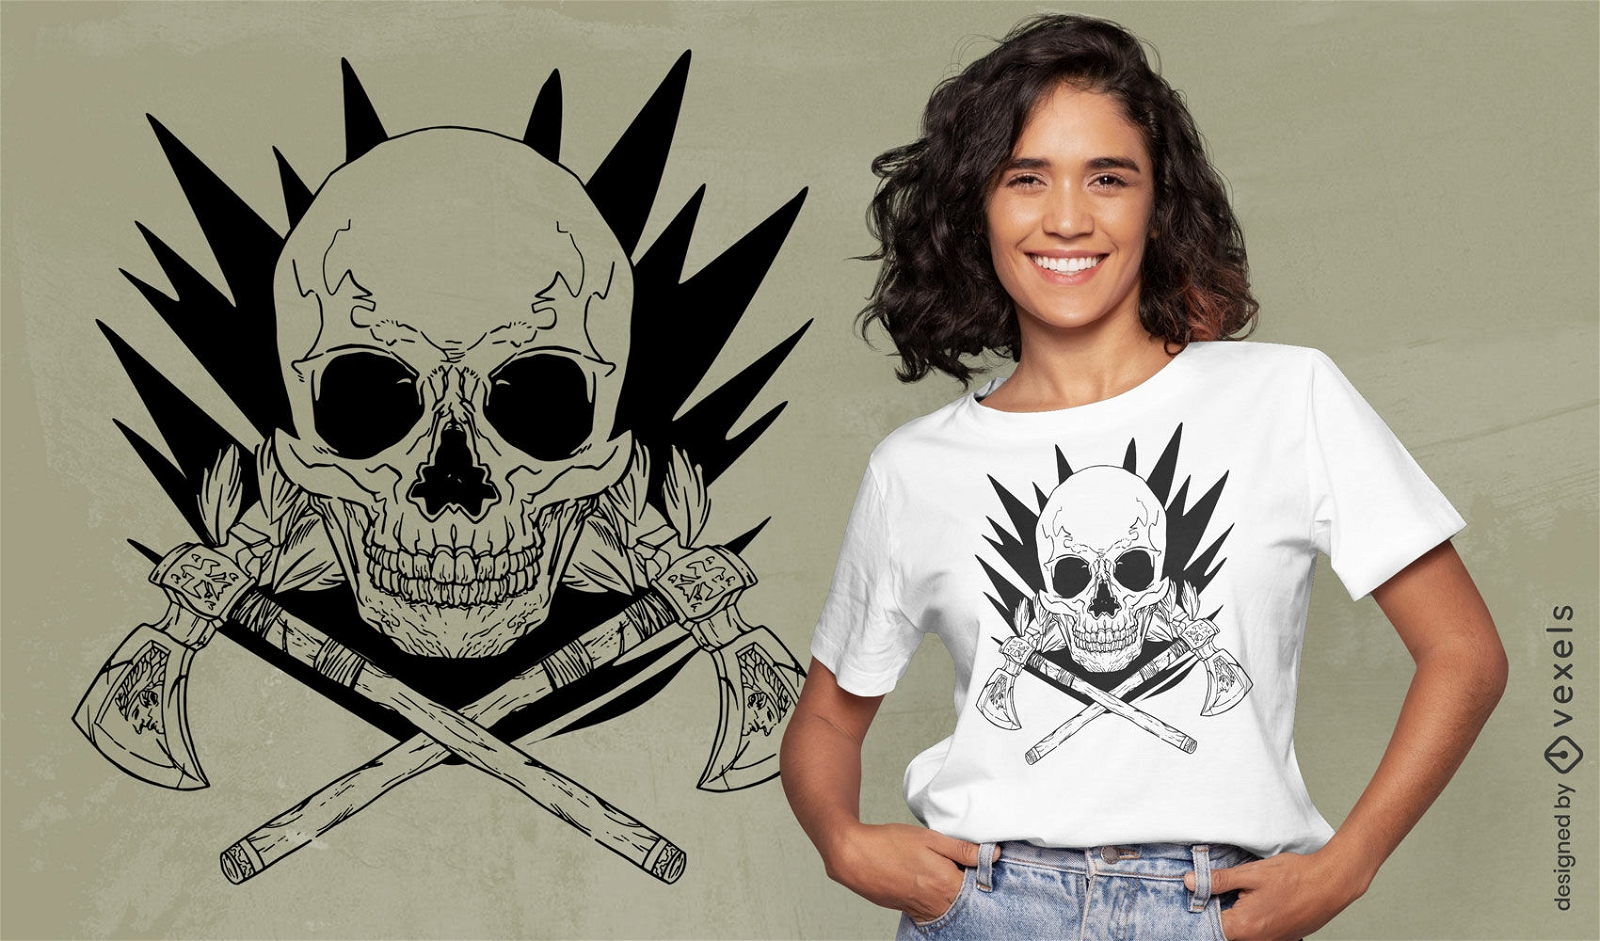 Skull with axe weapons t-shirt design